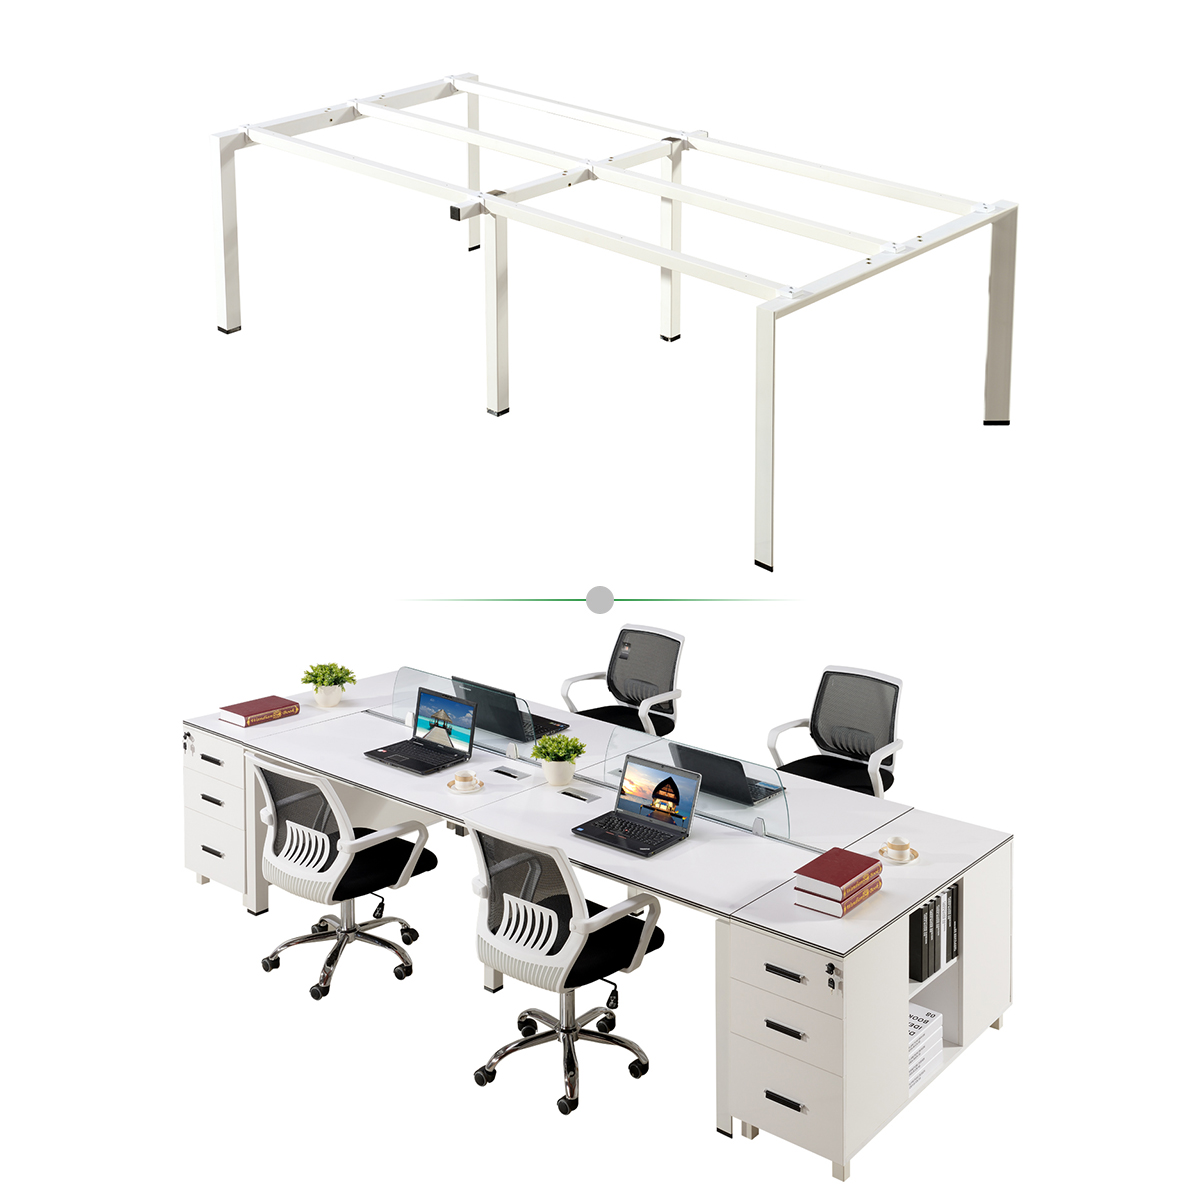 4 People Office Desk with Drawer Cabinet 1.jpg